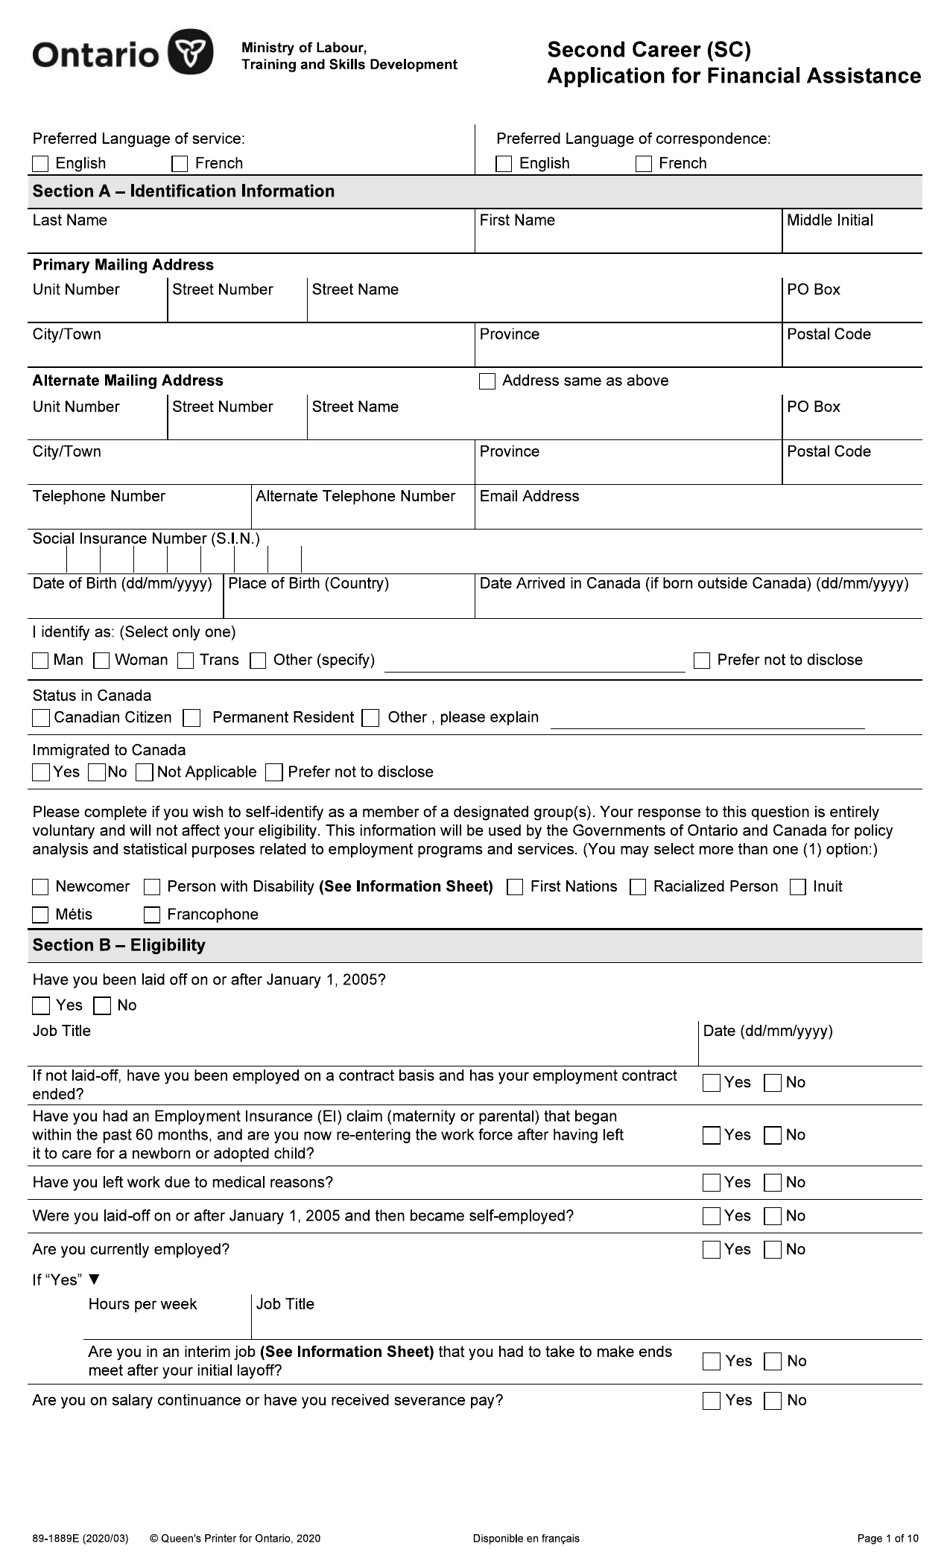 Form 89-1889E Application for Financial Assistance - Second Career (Sc) - Ontario, Canada, Page 1